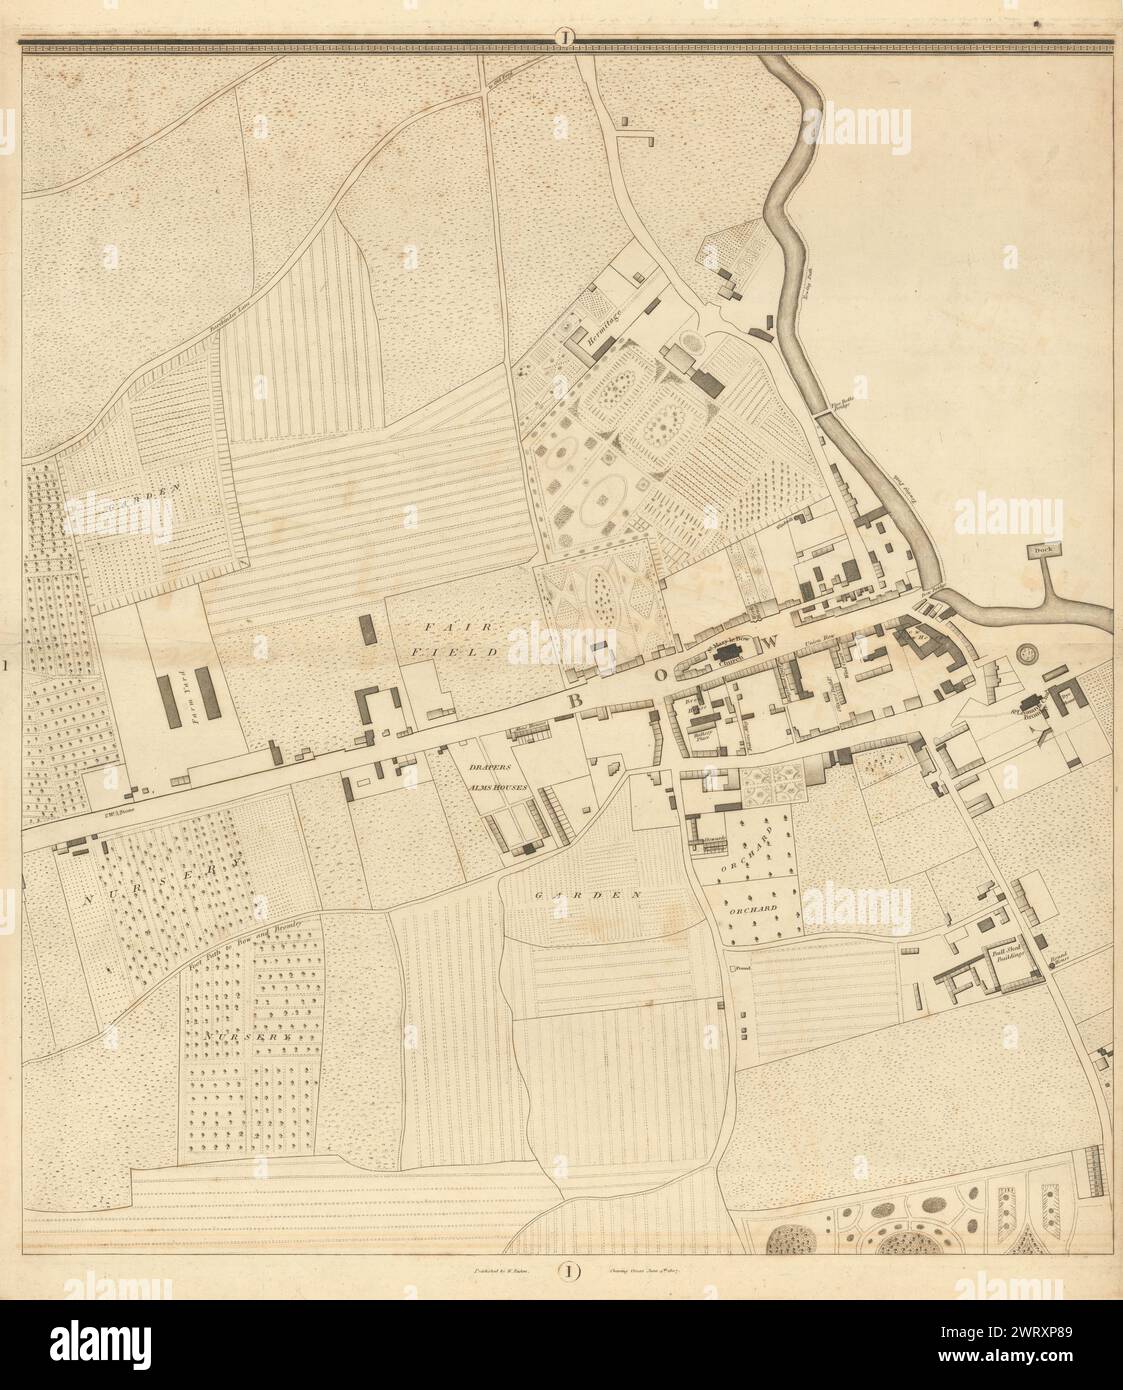 Horwood/Faden London I1 Bow Road Bow Bromley-by-Bow 1807 vecchia mappa antica Foto Stock